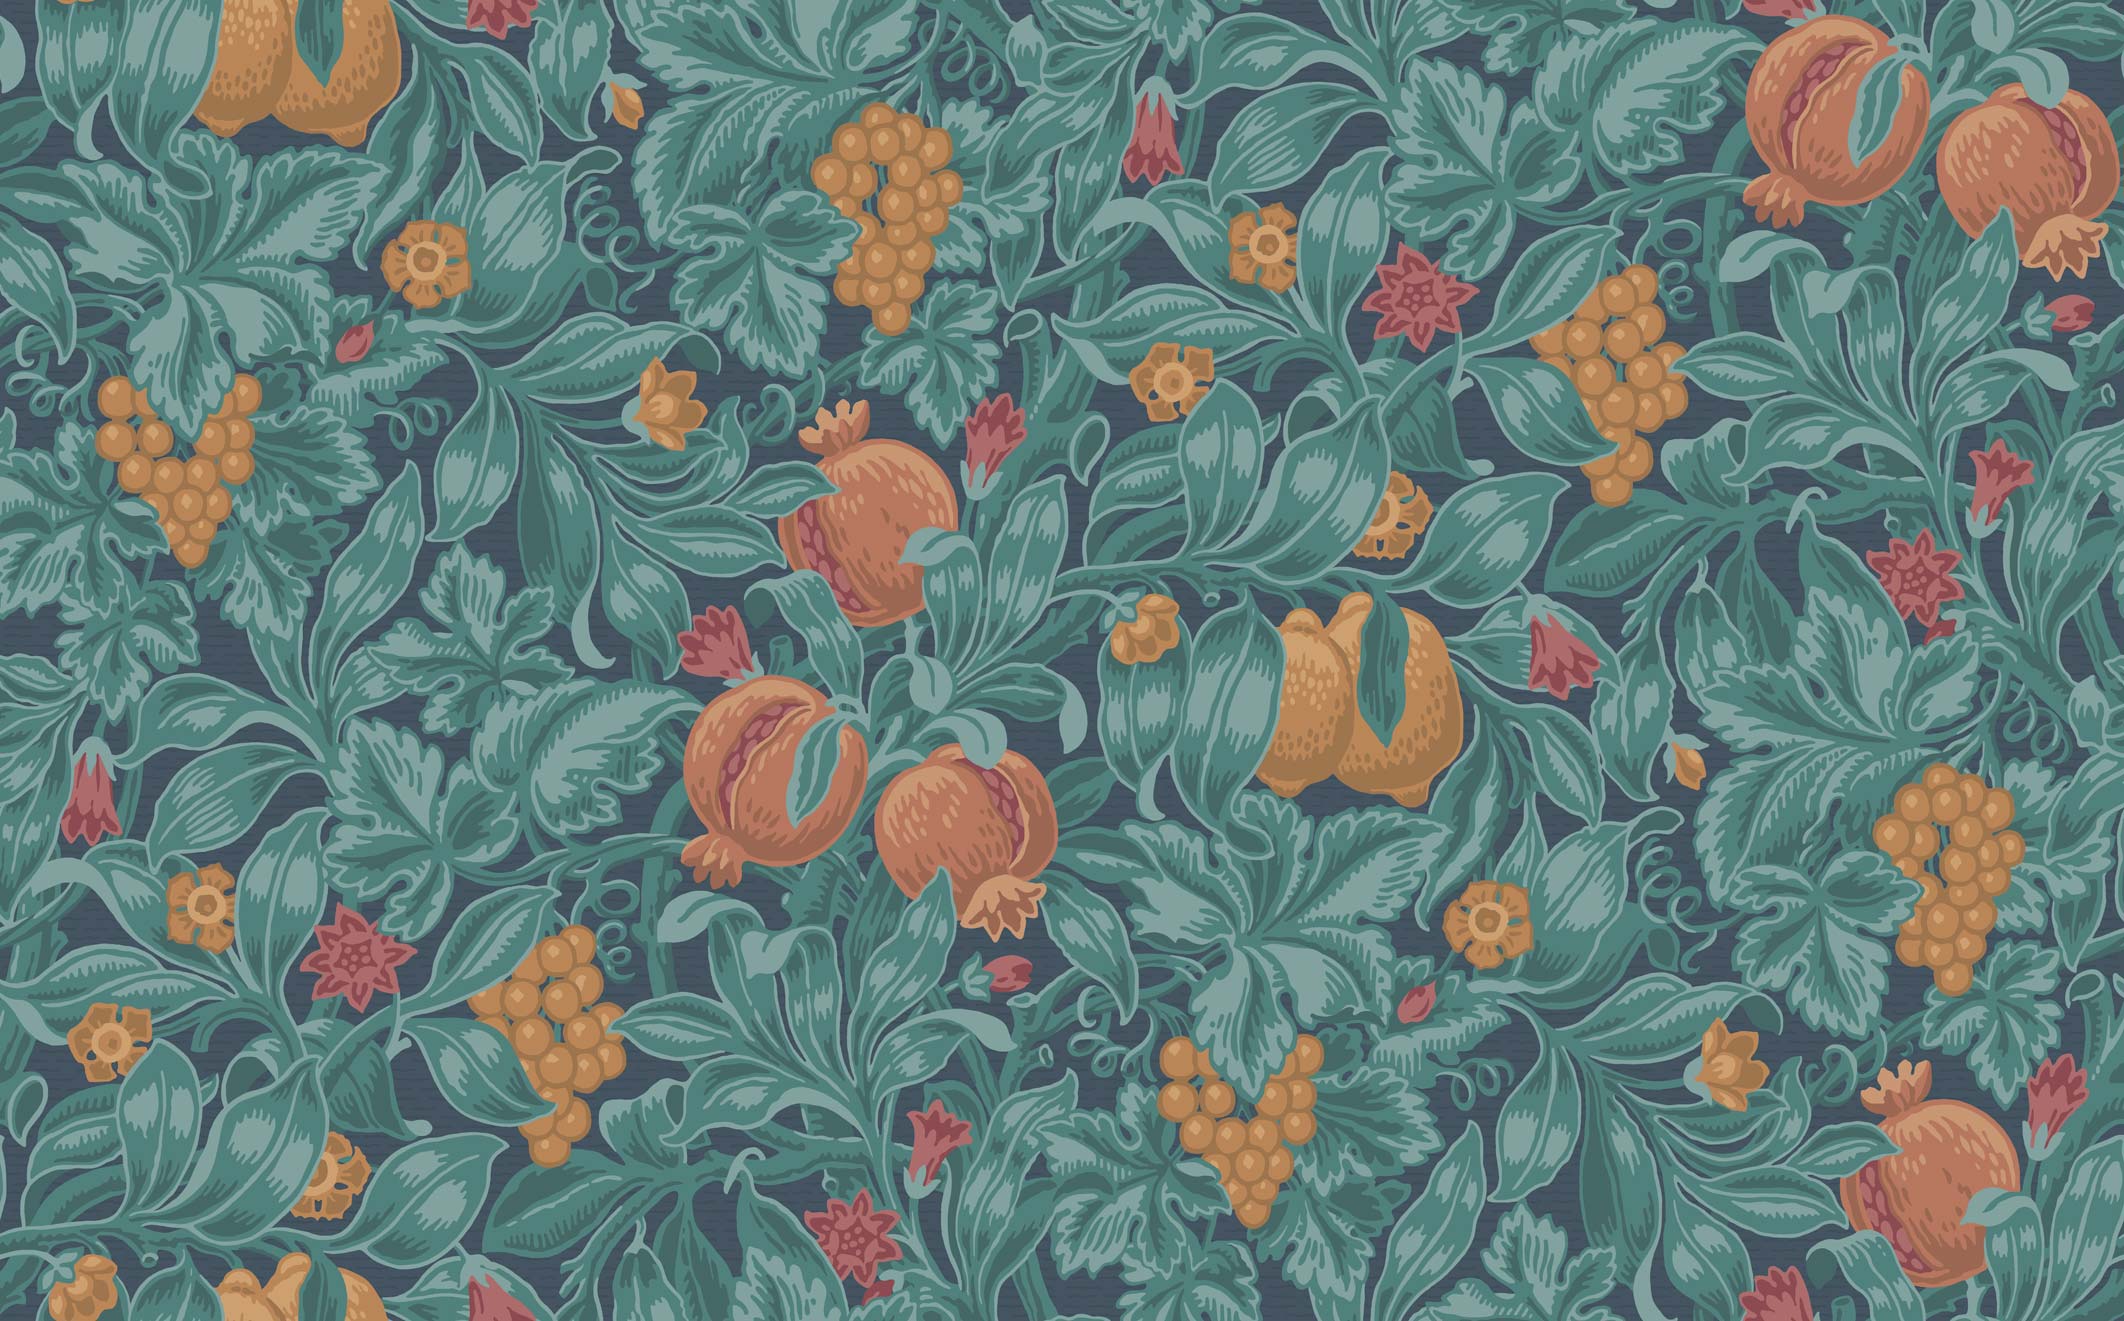 Wallpaper - Cole and Son - Pearwood - Vines of Pomona - Burnt Orange & Teal on Ink